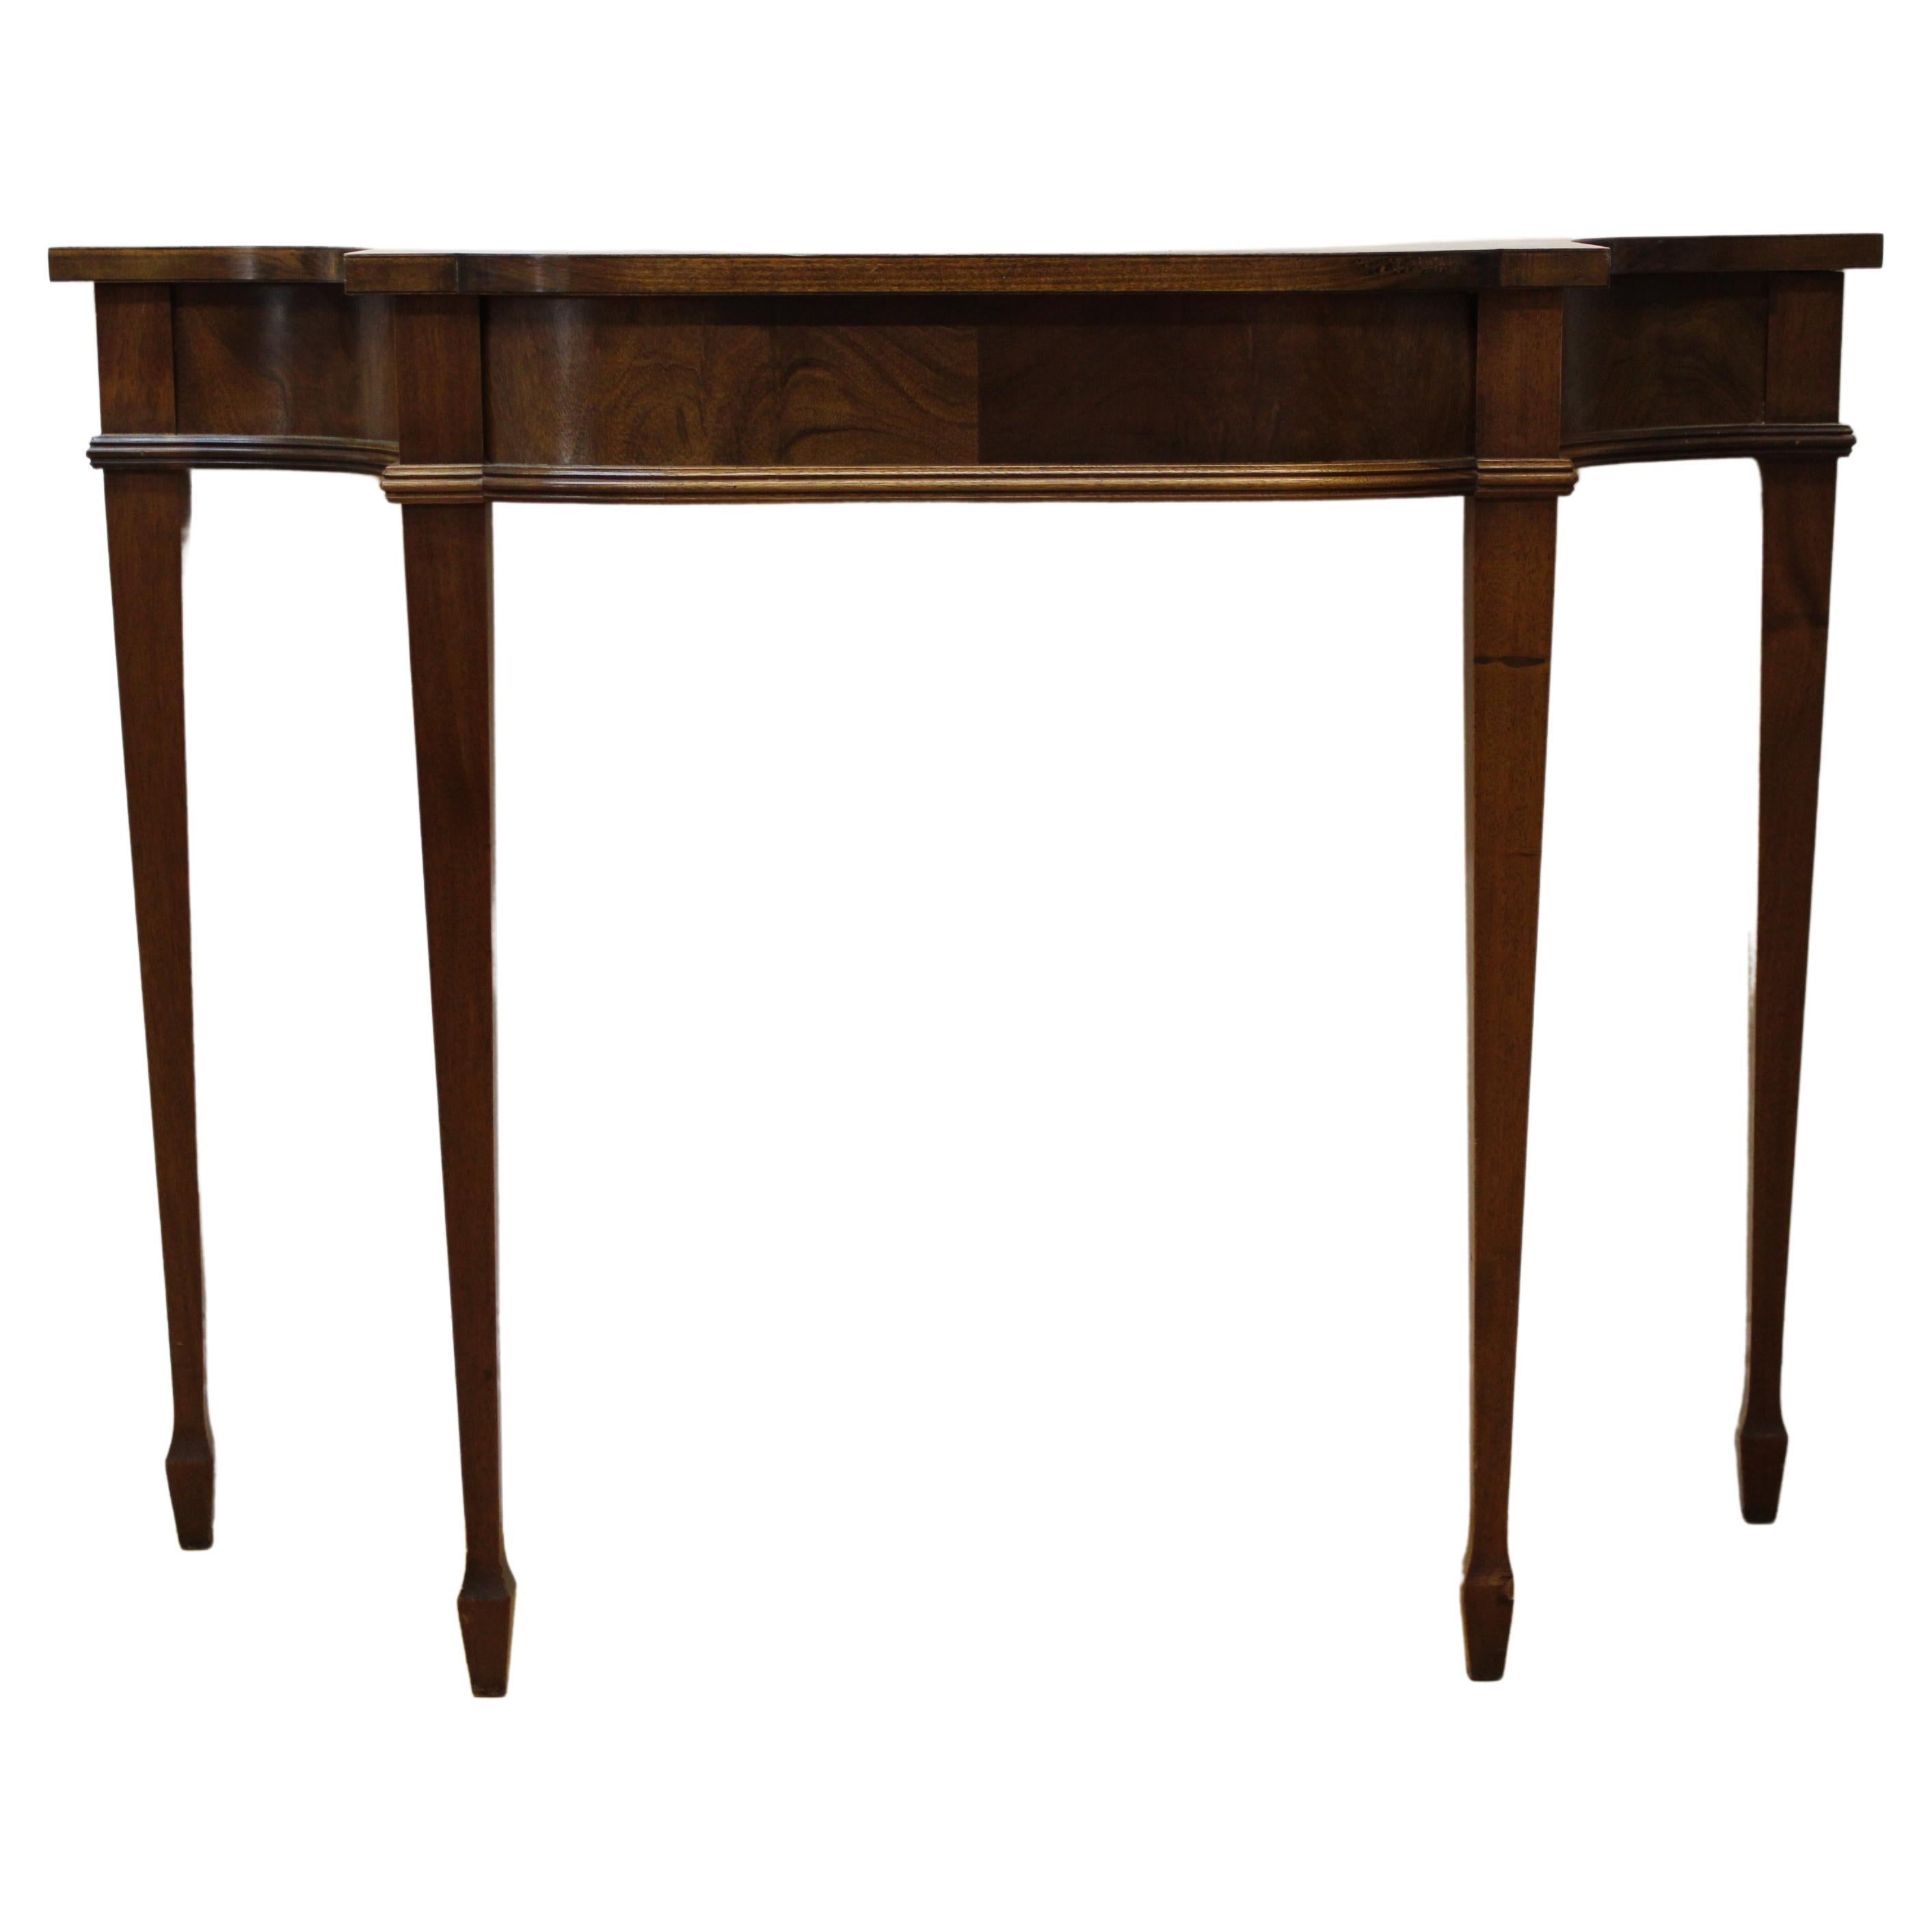 English Style Entry Hallway Table w/ Tapered Legs